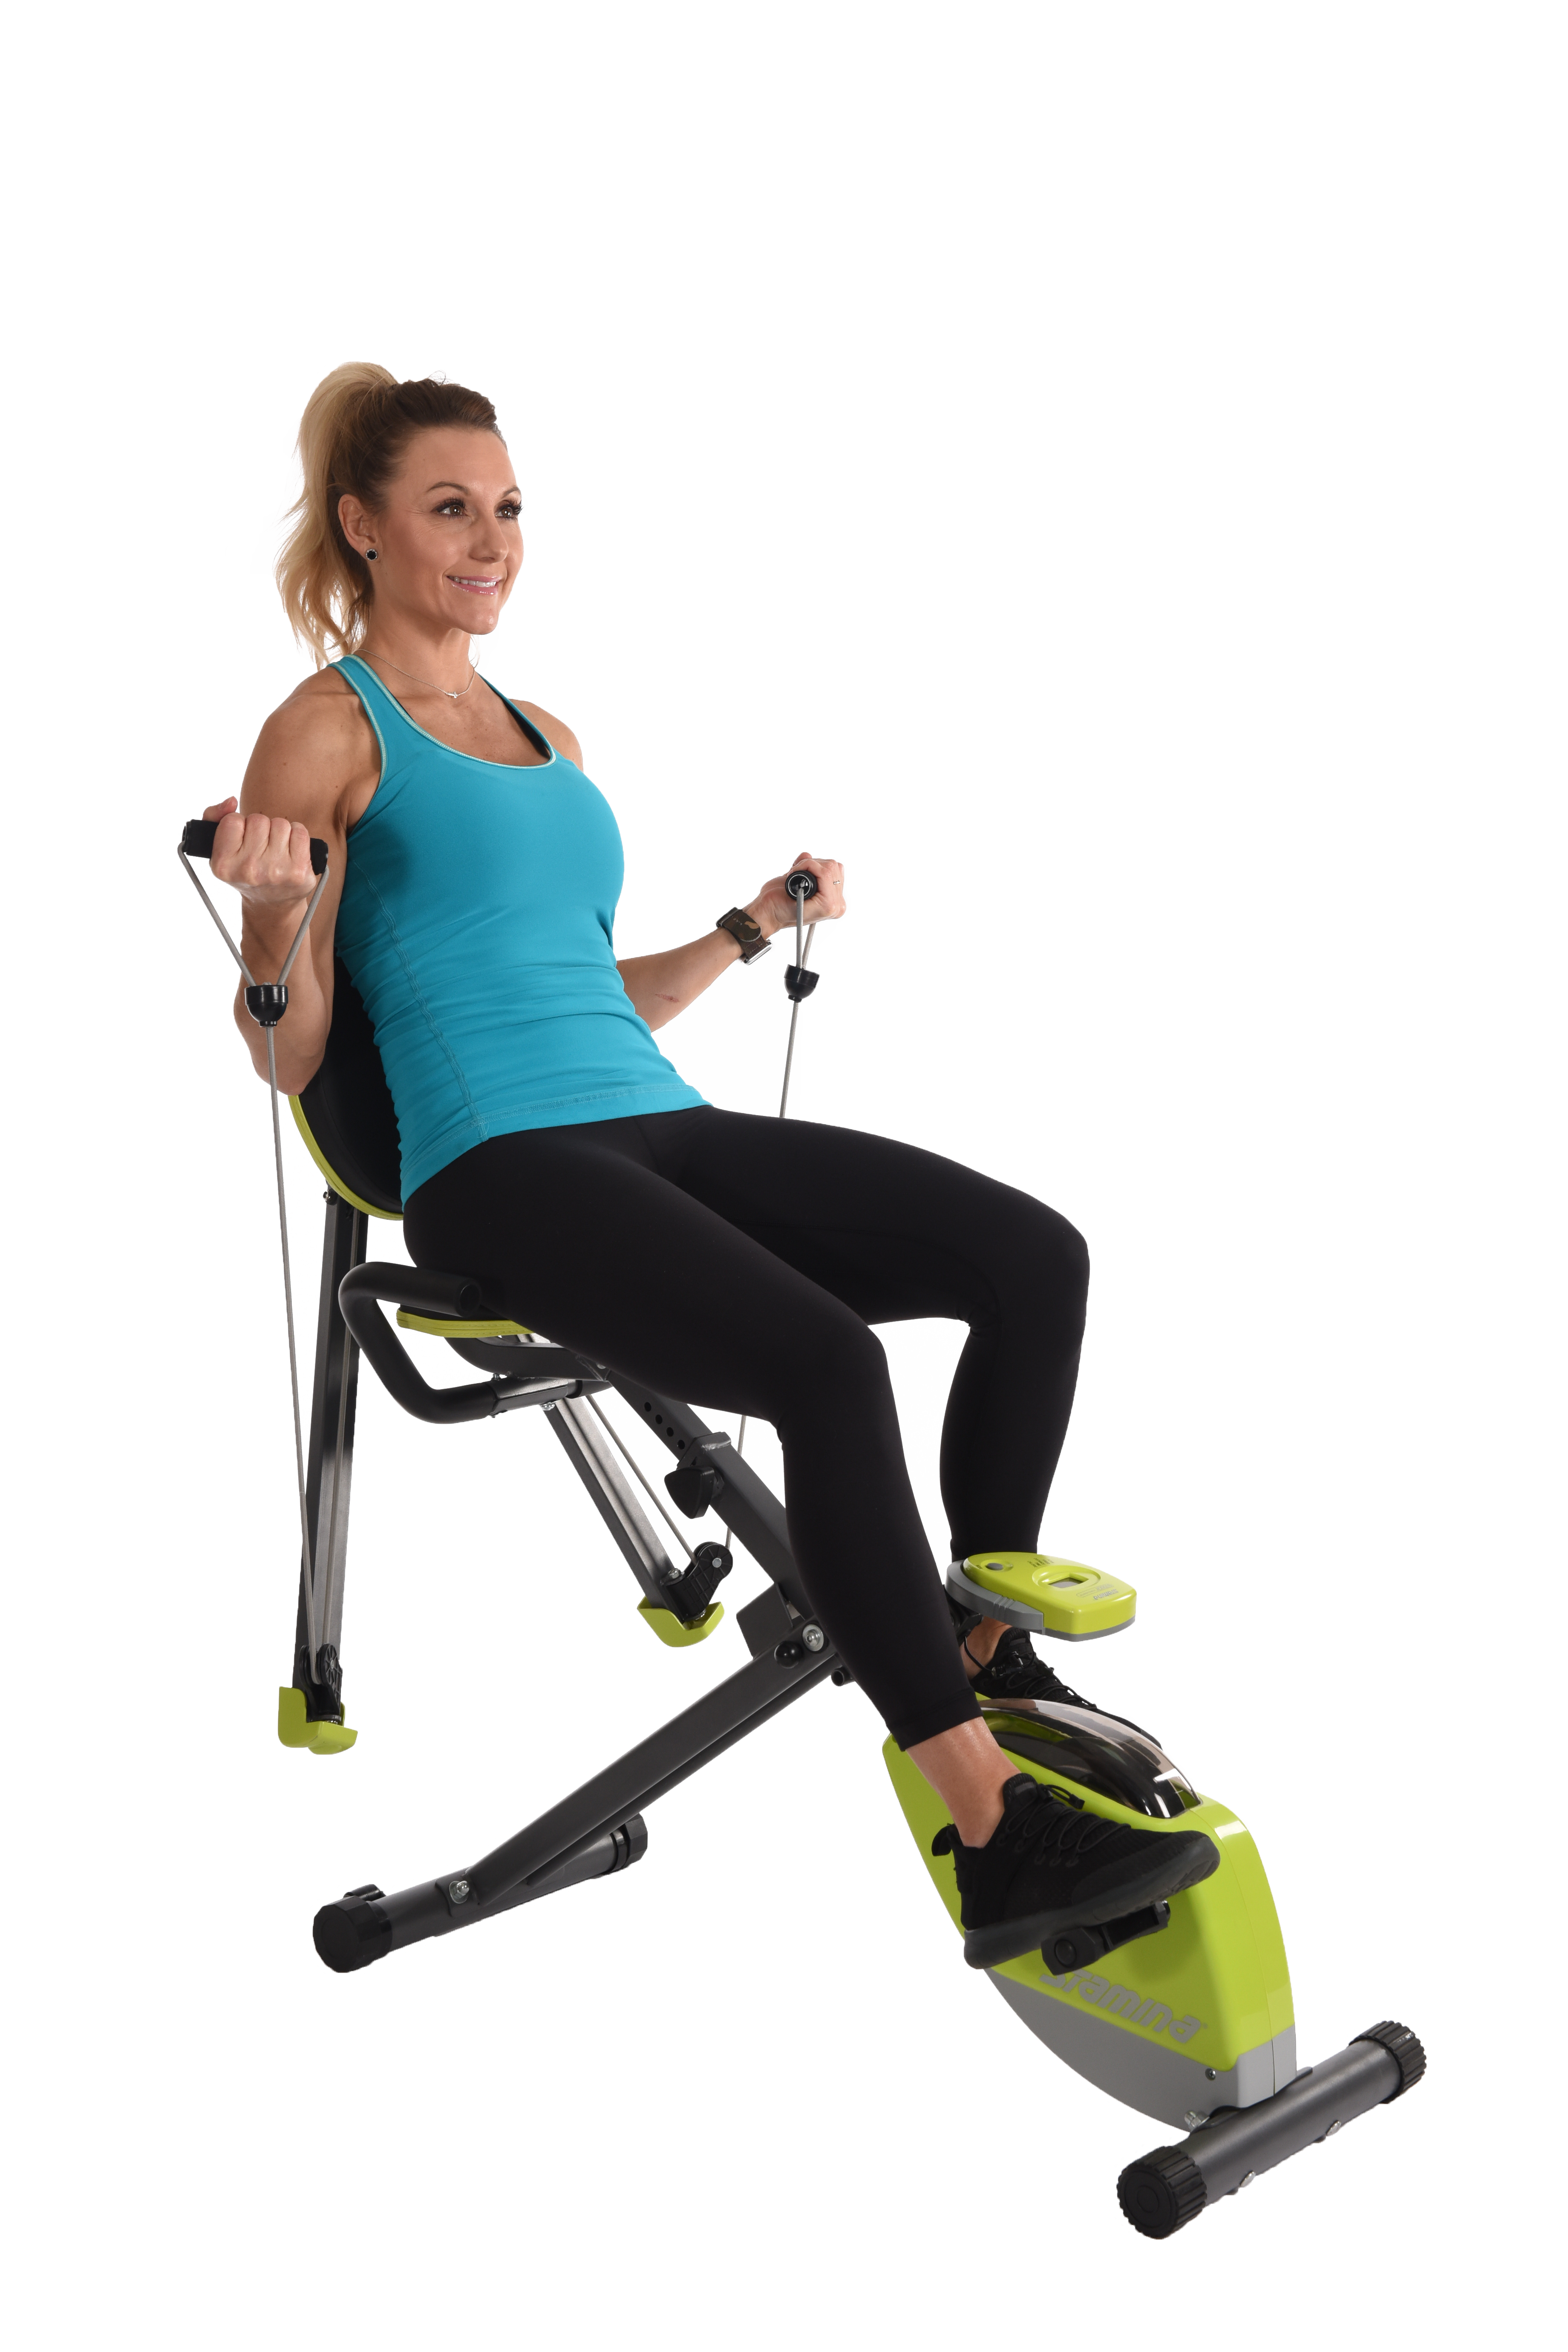 Performing curls on Stamina Wonder Exercise Bike With Strength System.